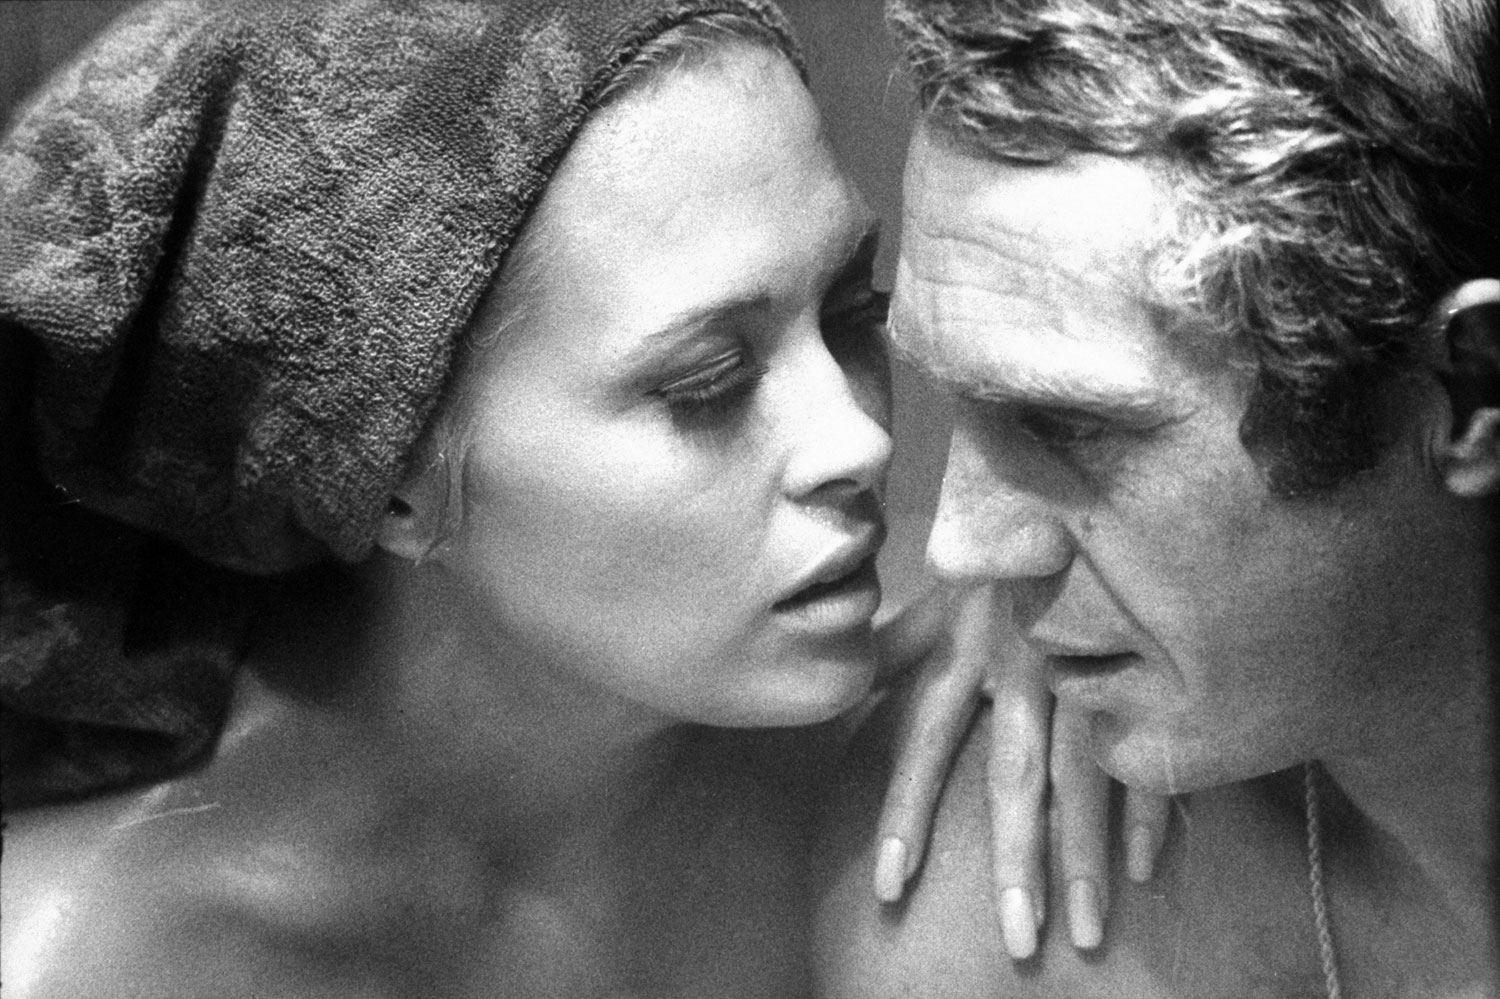 Faye Dunaway and Steve McQueen on the set of The Thomas Crown Affair, 1967.